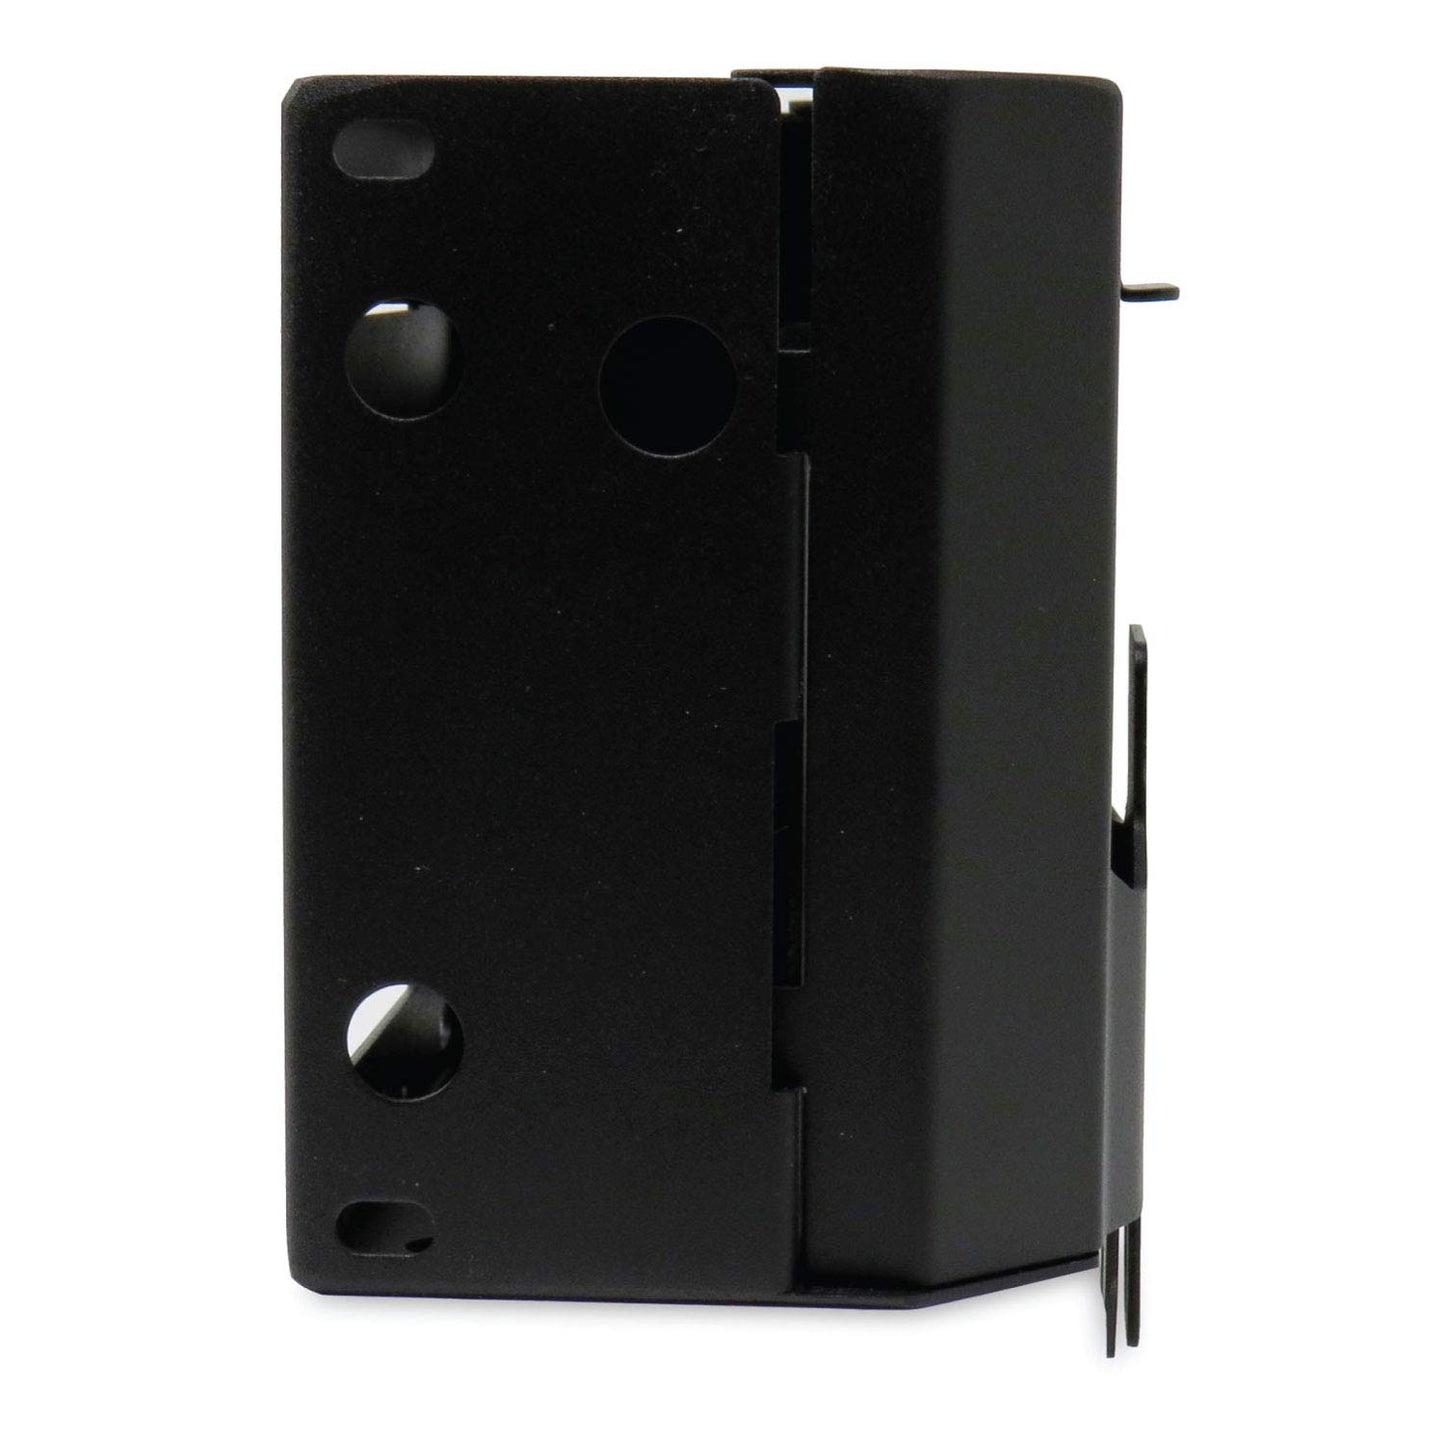 Vosker V100 and V200 Security Box for Security Cameras, Weather Resistant Heavy Duty Steel, Protects Cams from People, Animals, Theft, Environmental Damage